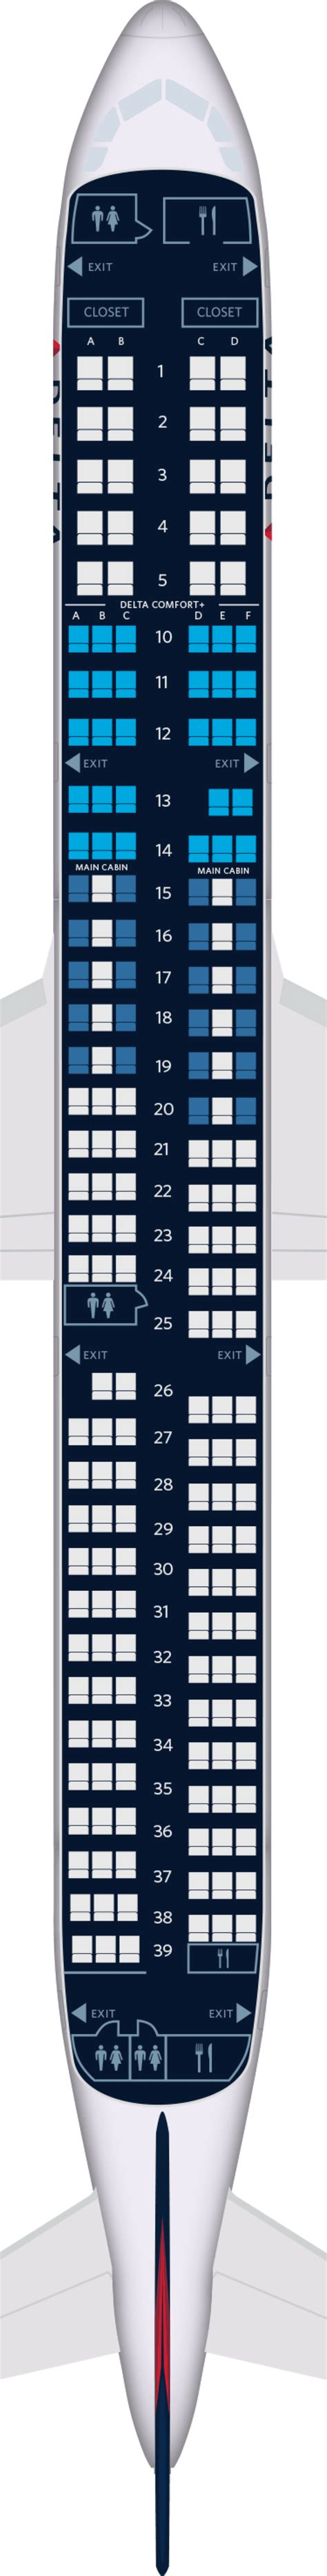 A321 seat map american - Delta Comfort+. Based on the Delta Airbus A321 seat map, from rows 10 to 14 are Delta Comfort+ seats. This cabin’s first row of seats is too close to the bulkhead, limiting space for passengers to stretch their legs. There is a 3-3 configuration for rows 10, 11, and 12 and an exit row behind the seats. This exit makes the seats 12A and 12F ... 